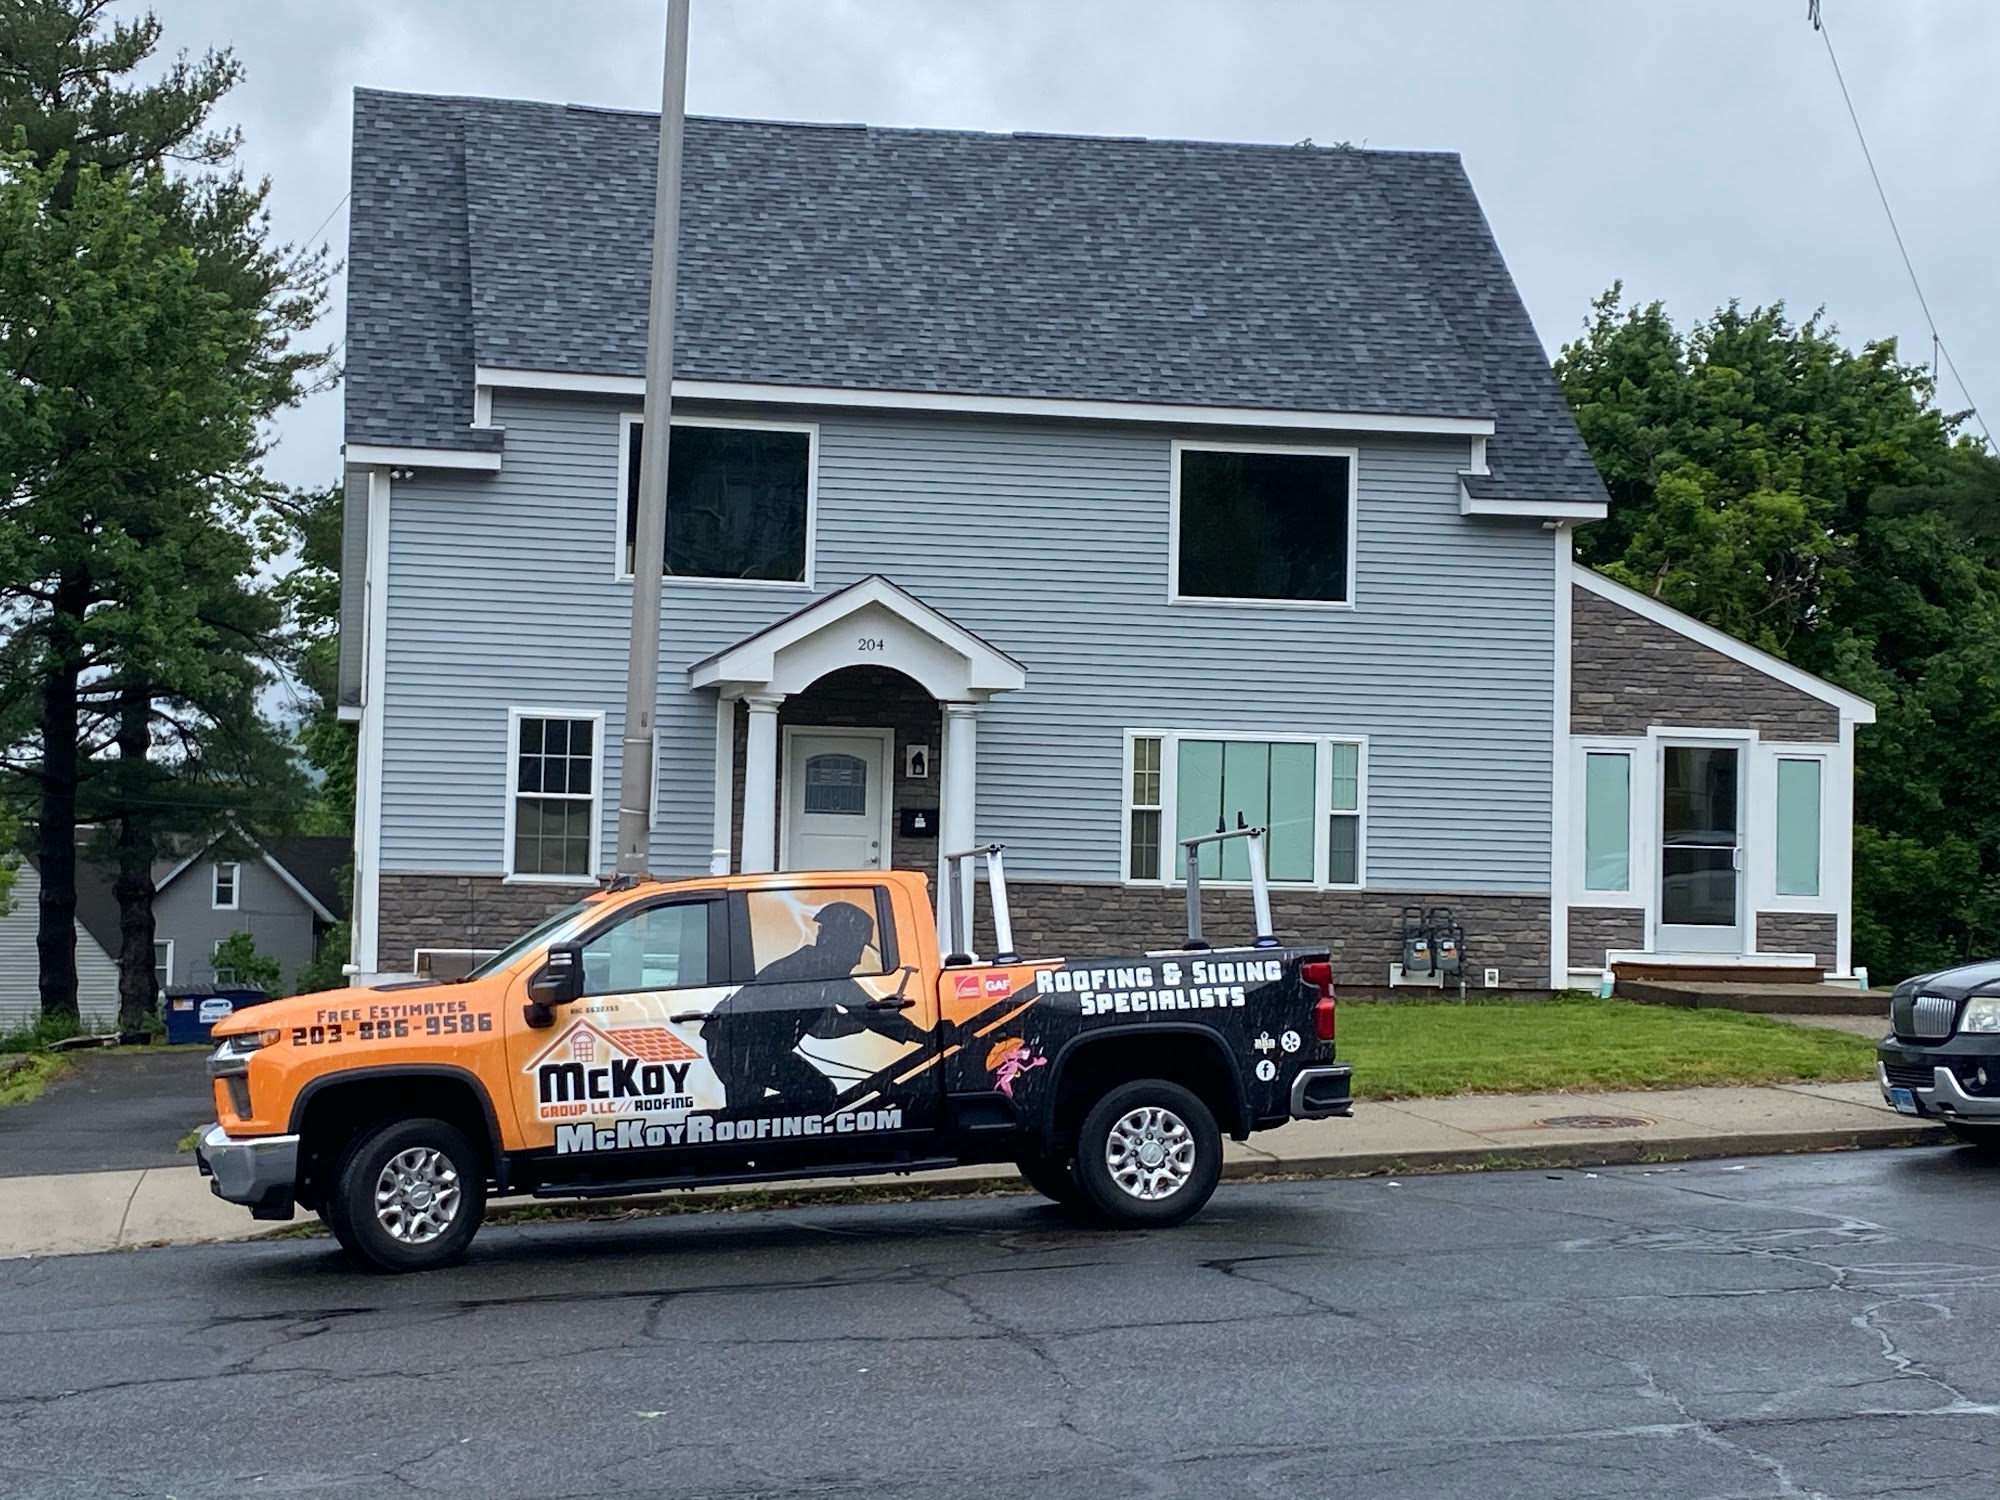 The Mckoy Group | CT Roofing & Siding Experts